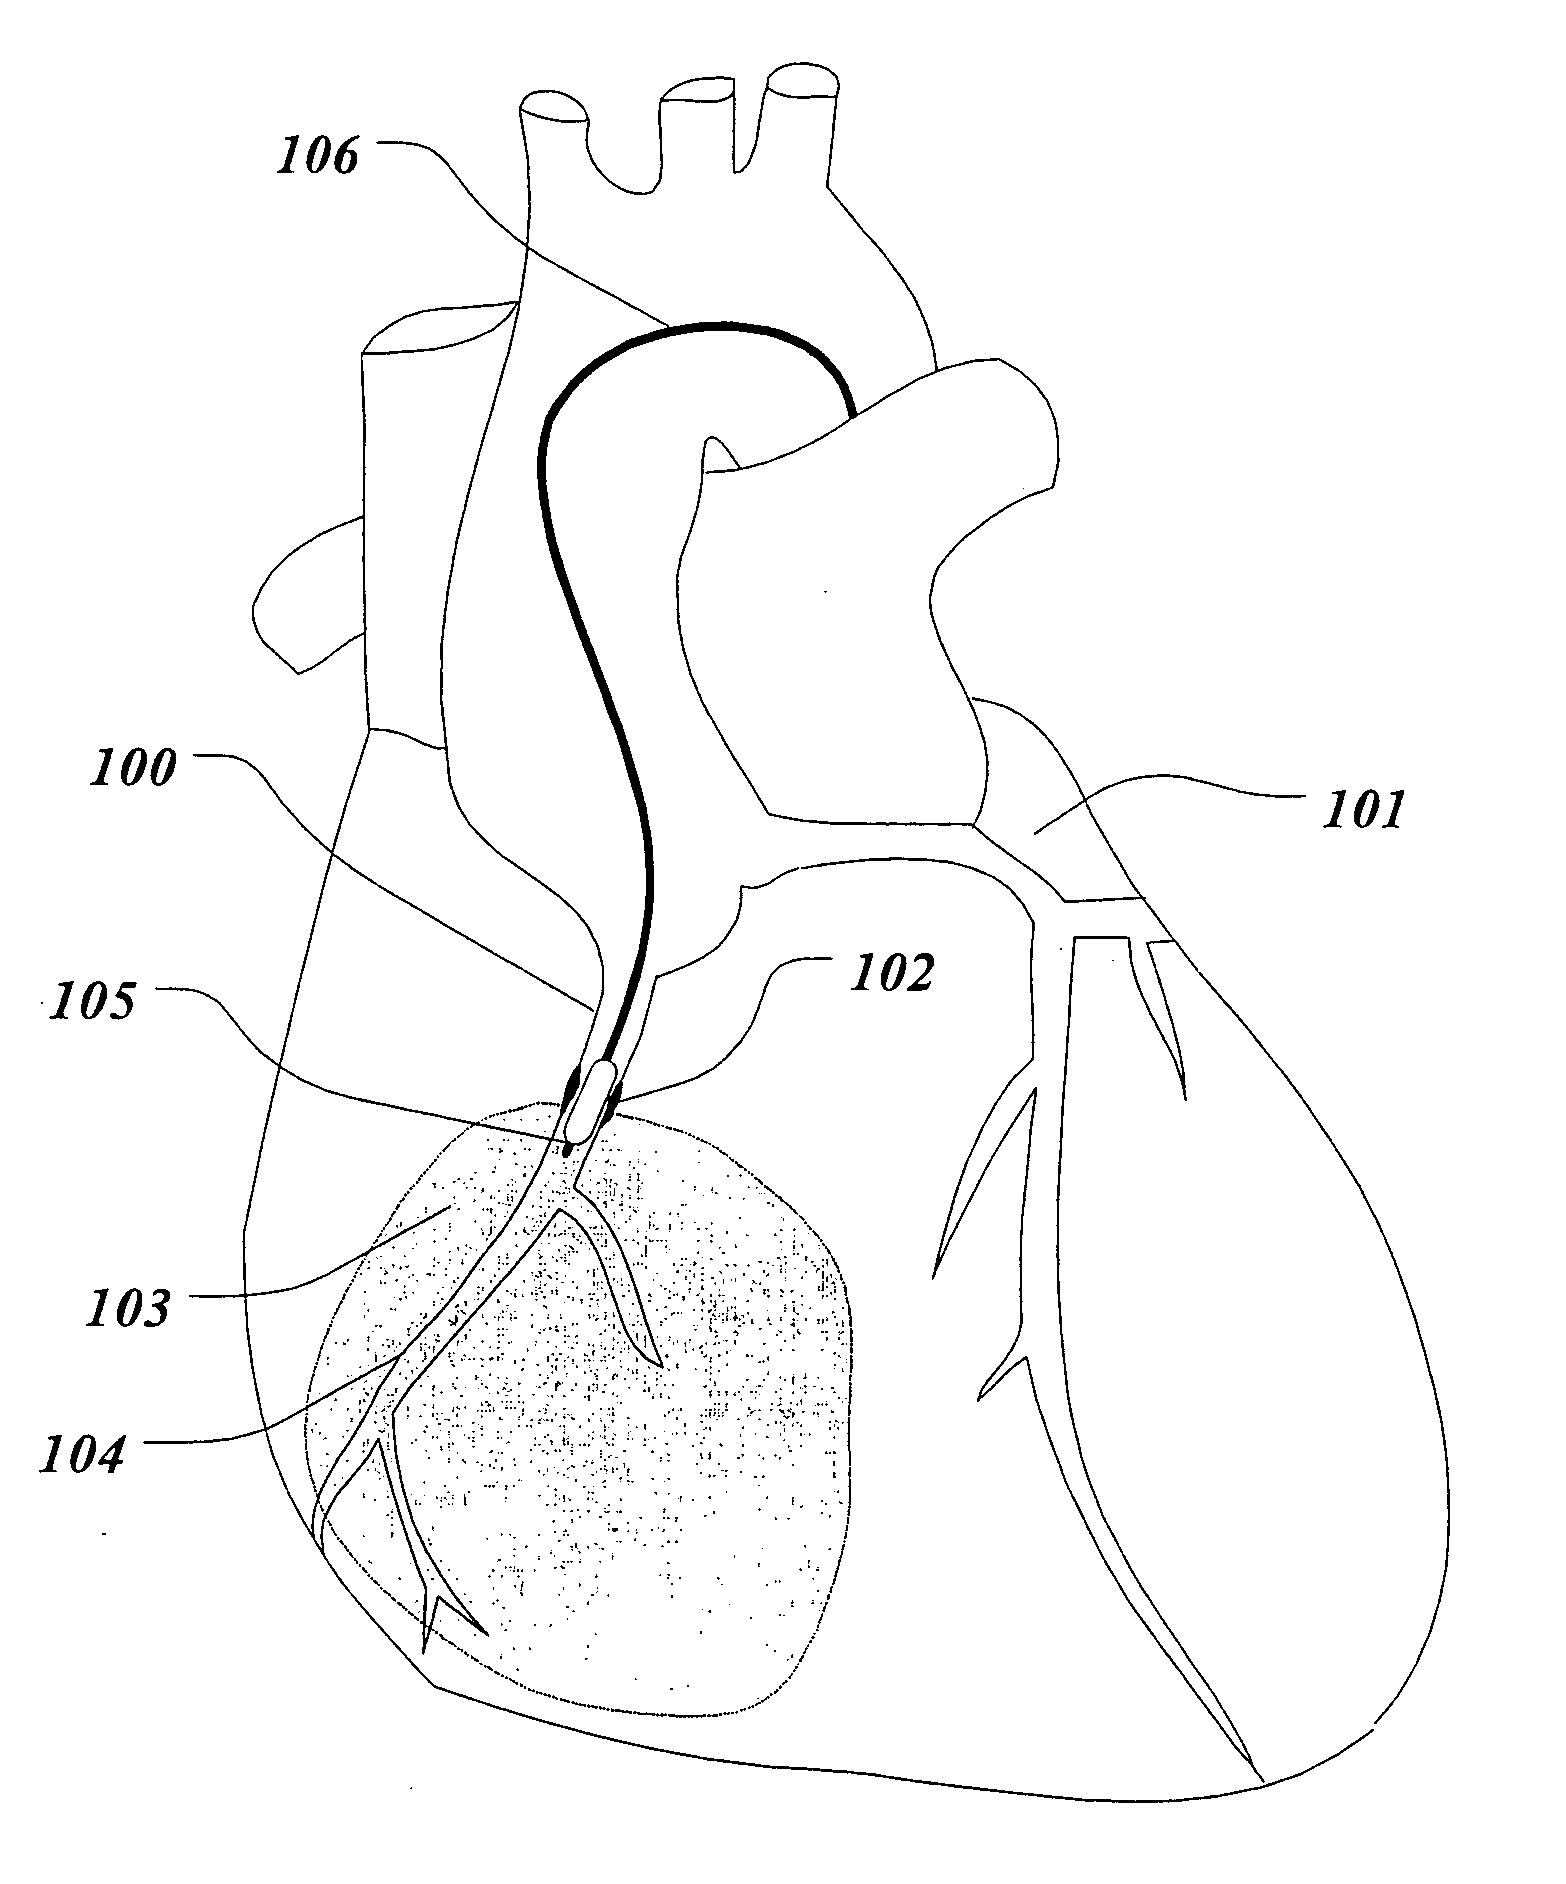 System and method for the treatment of reperfusion injury